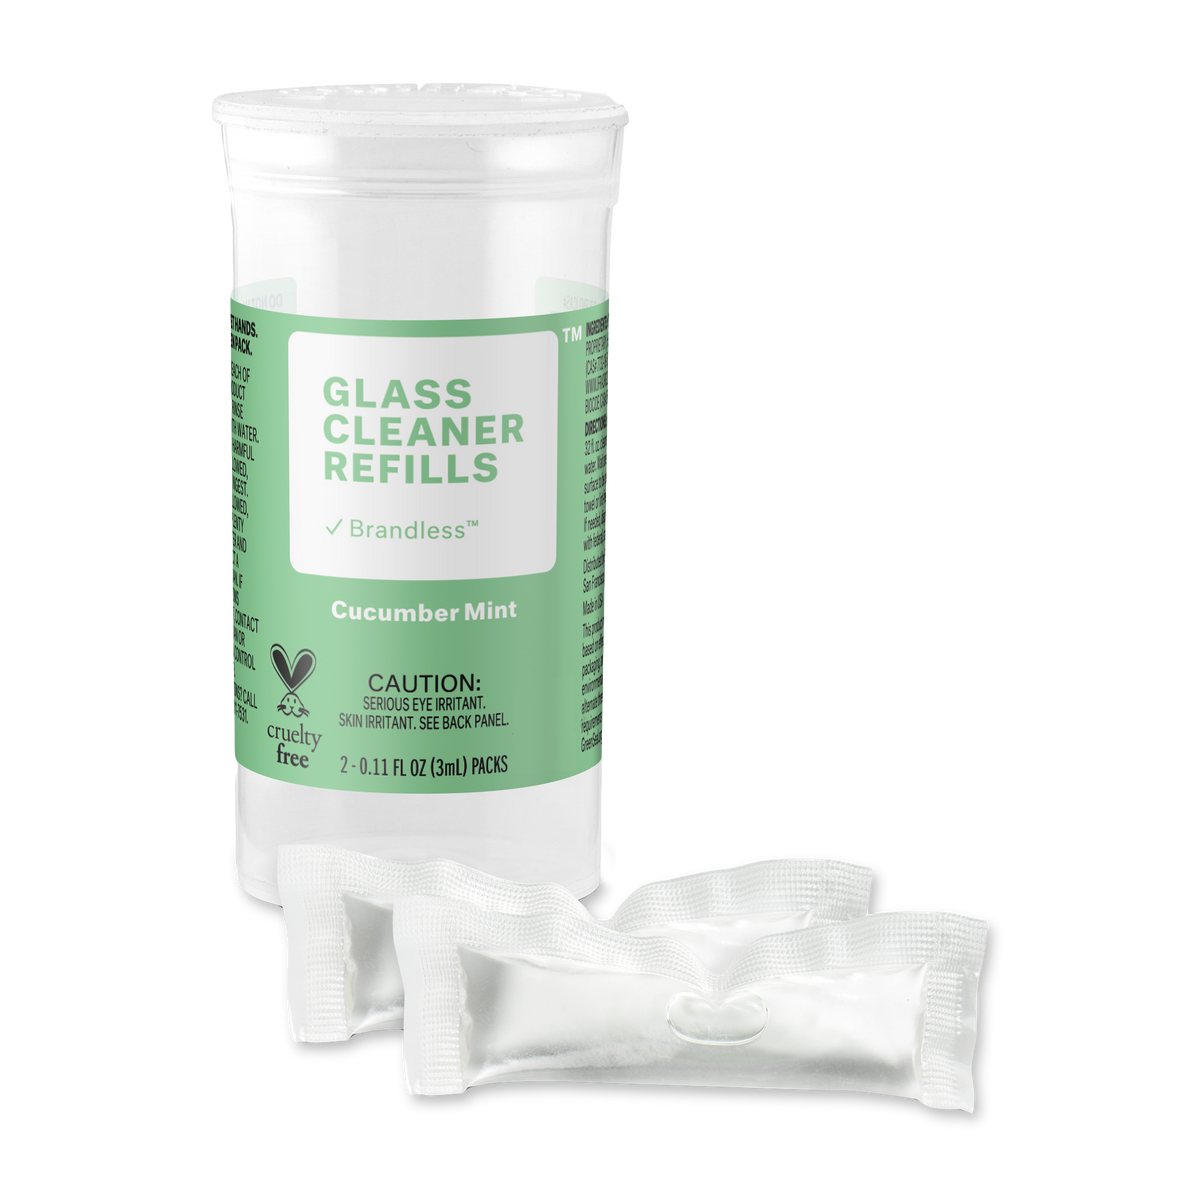 Glass Cleaner refill packet close up view